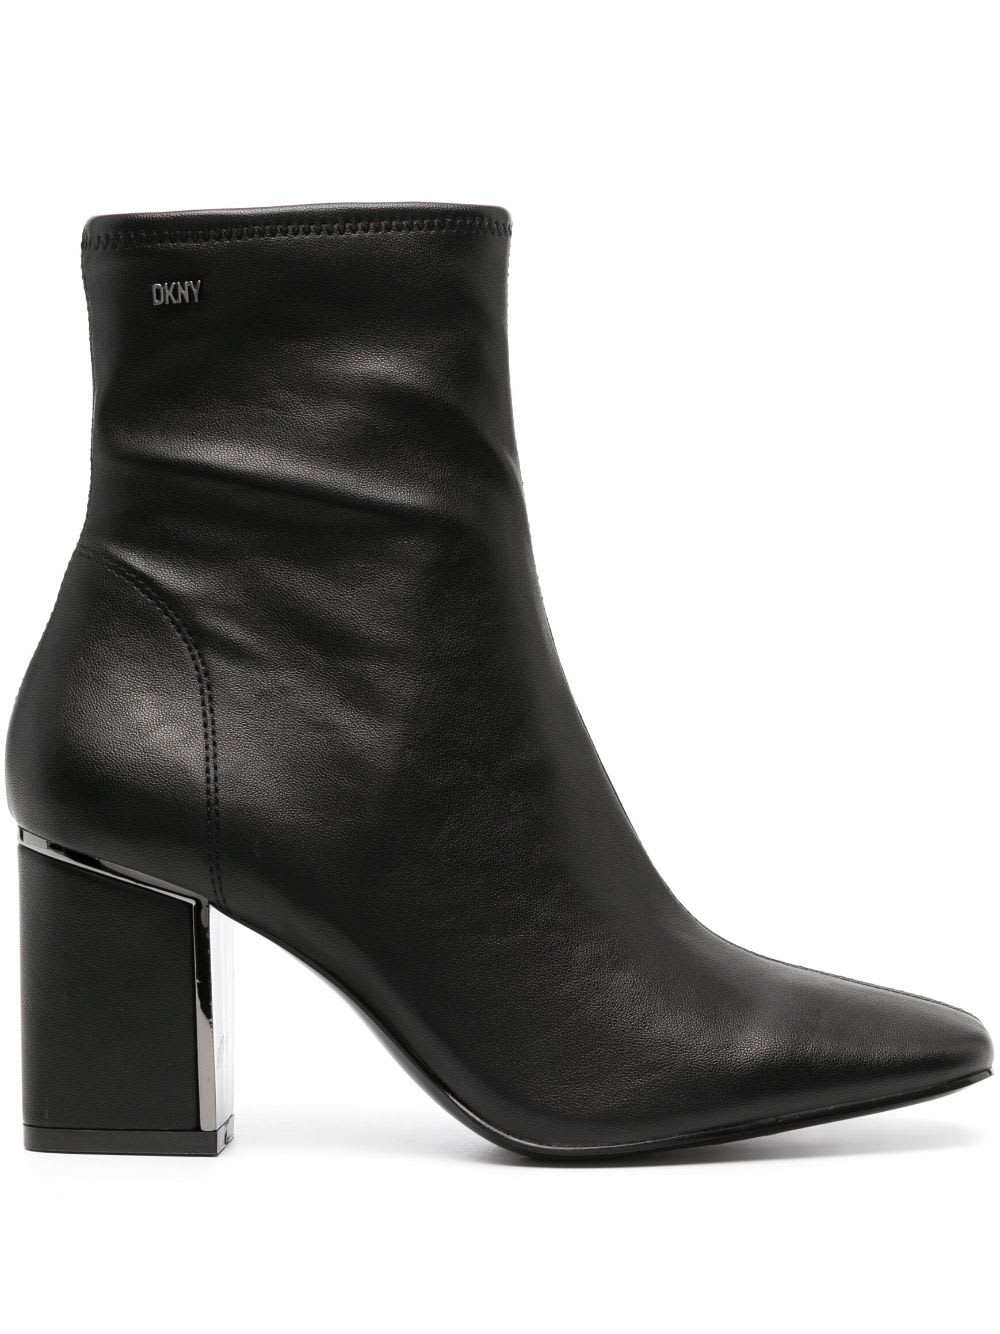 DKNY CAVALE ANKLE BOOT